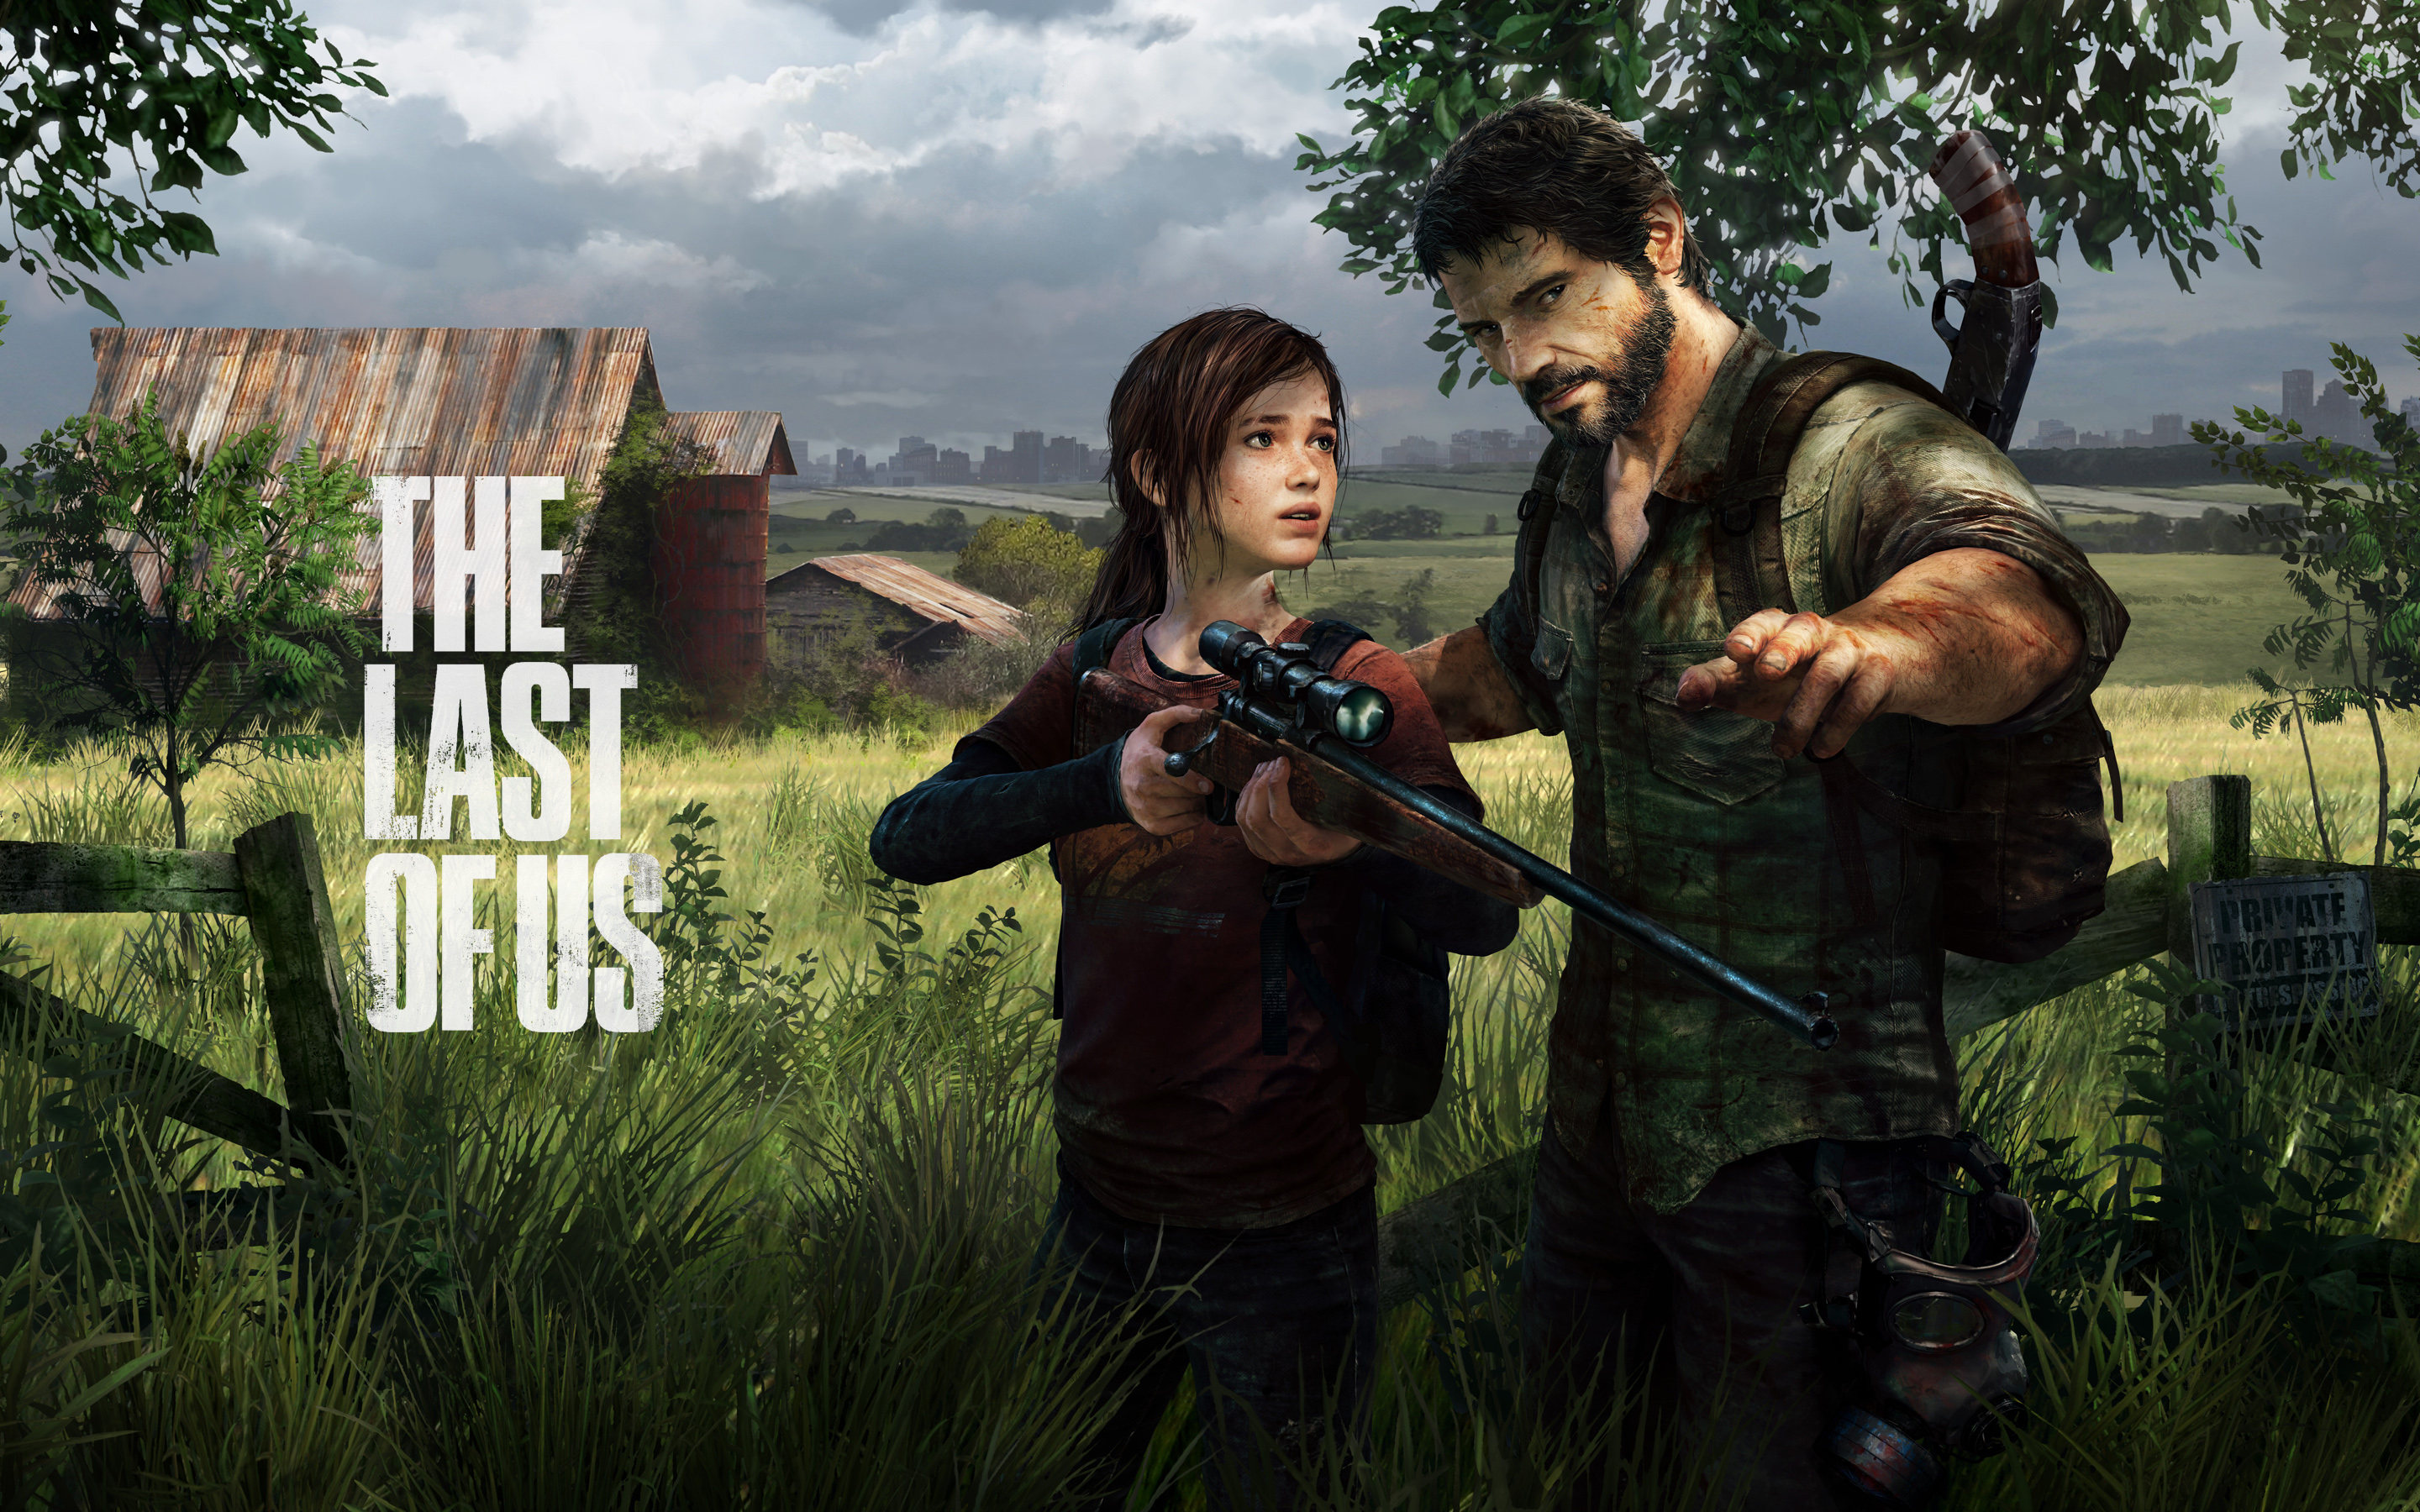 Joel Ellie and Riley Abel from The Last of Us 4K wallpaper download